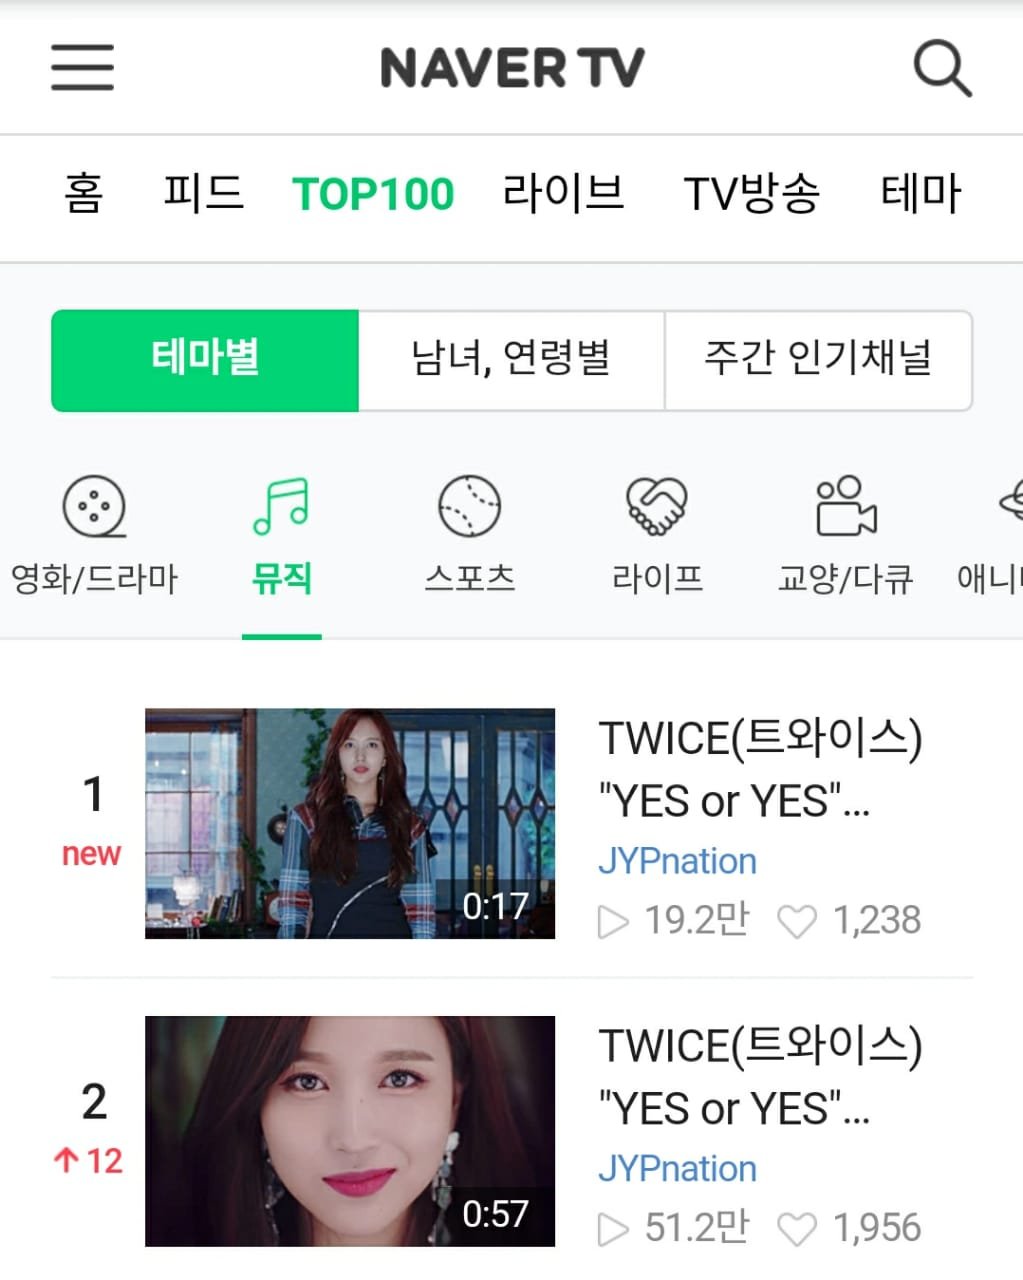 boykot gøre ondt Jep TWICE Charts on Twitter: "Naver TV TOP 100 — Music Chart: #1. 'YES or YES'  Teaser E (NEW) #2. 'YES or YES' Teaser Y (+12) https://t.co/bmCa3OtlRH" /  Twitter